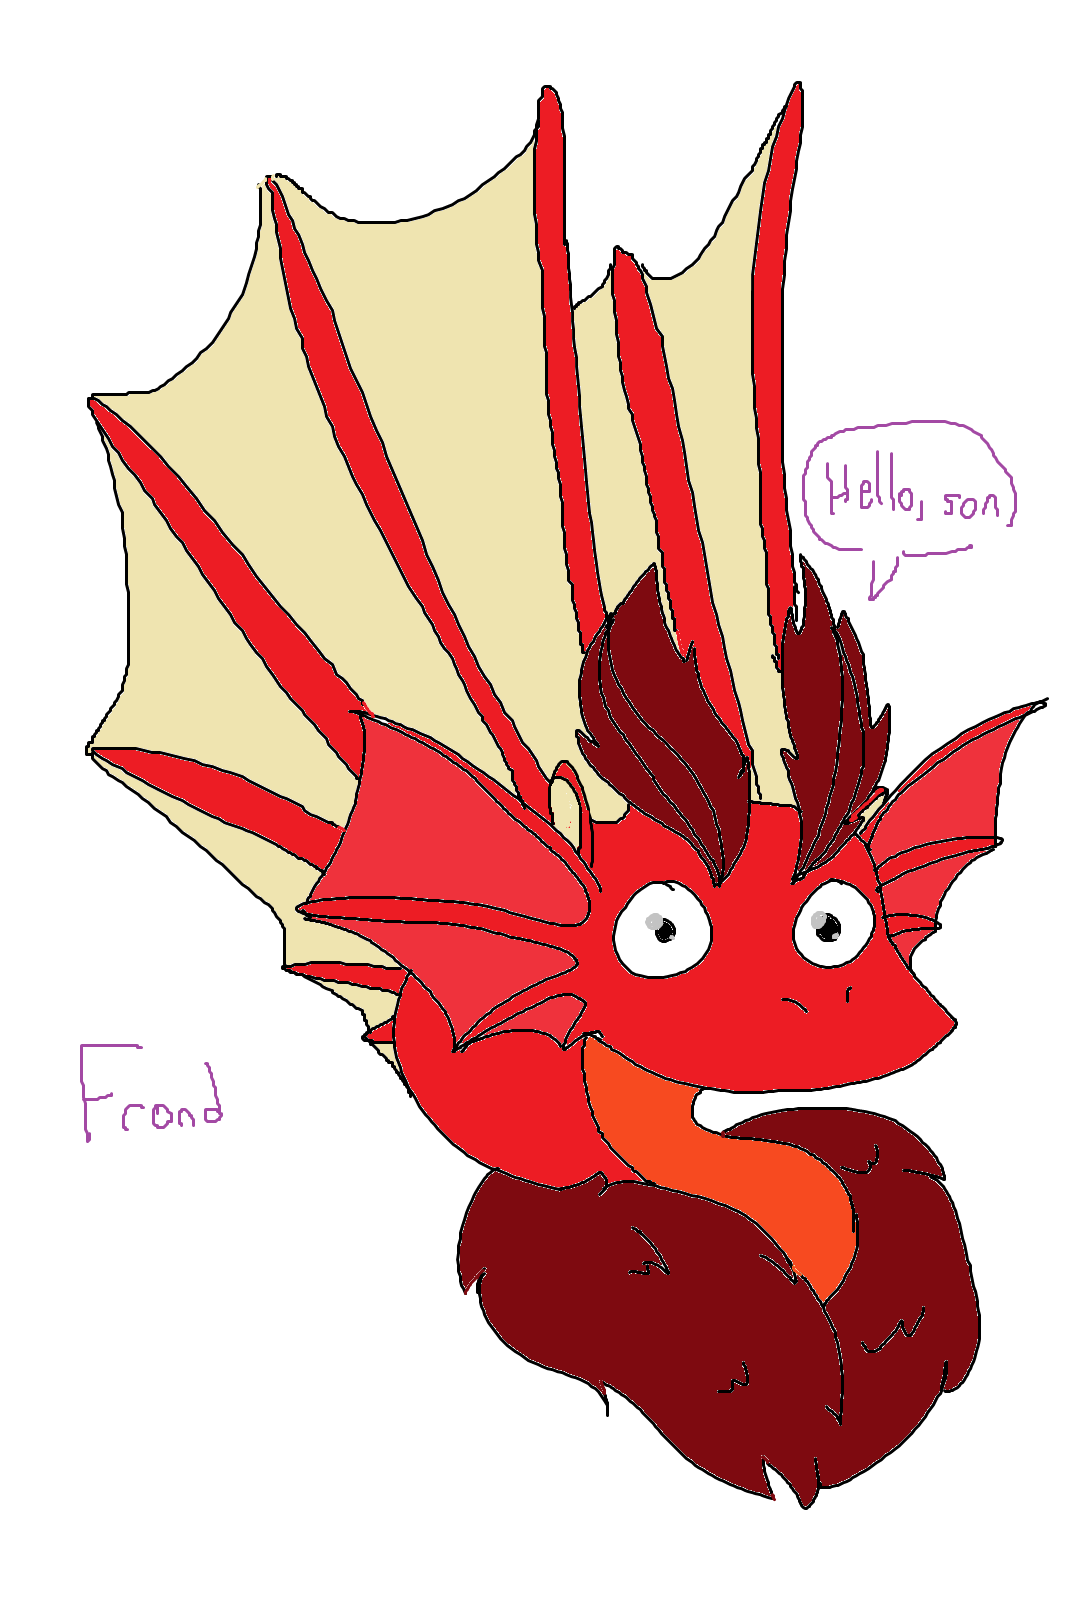 frond_by_hoolofthenorth-dcei3ek.png